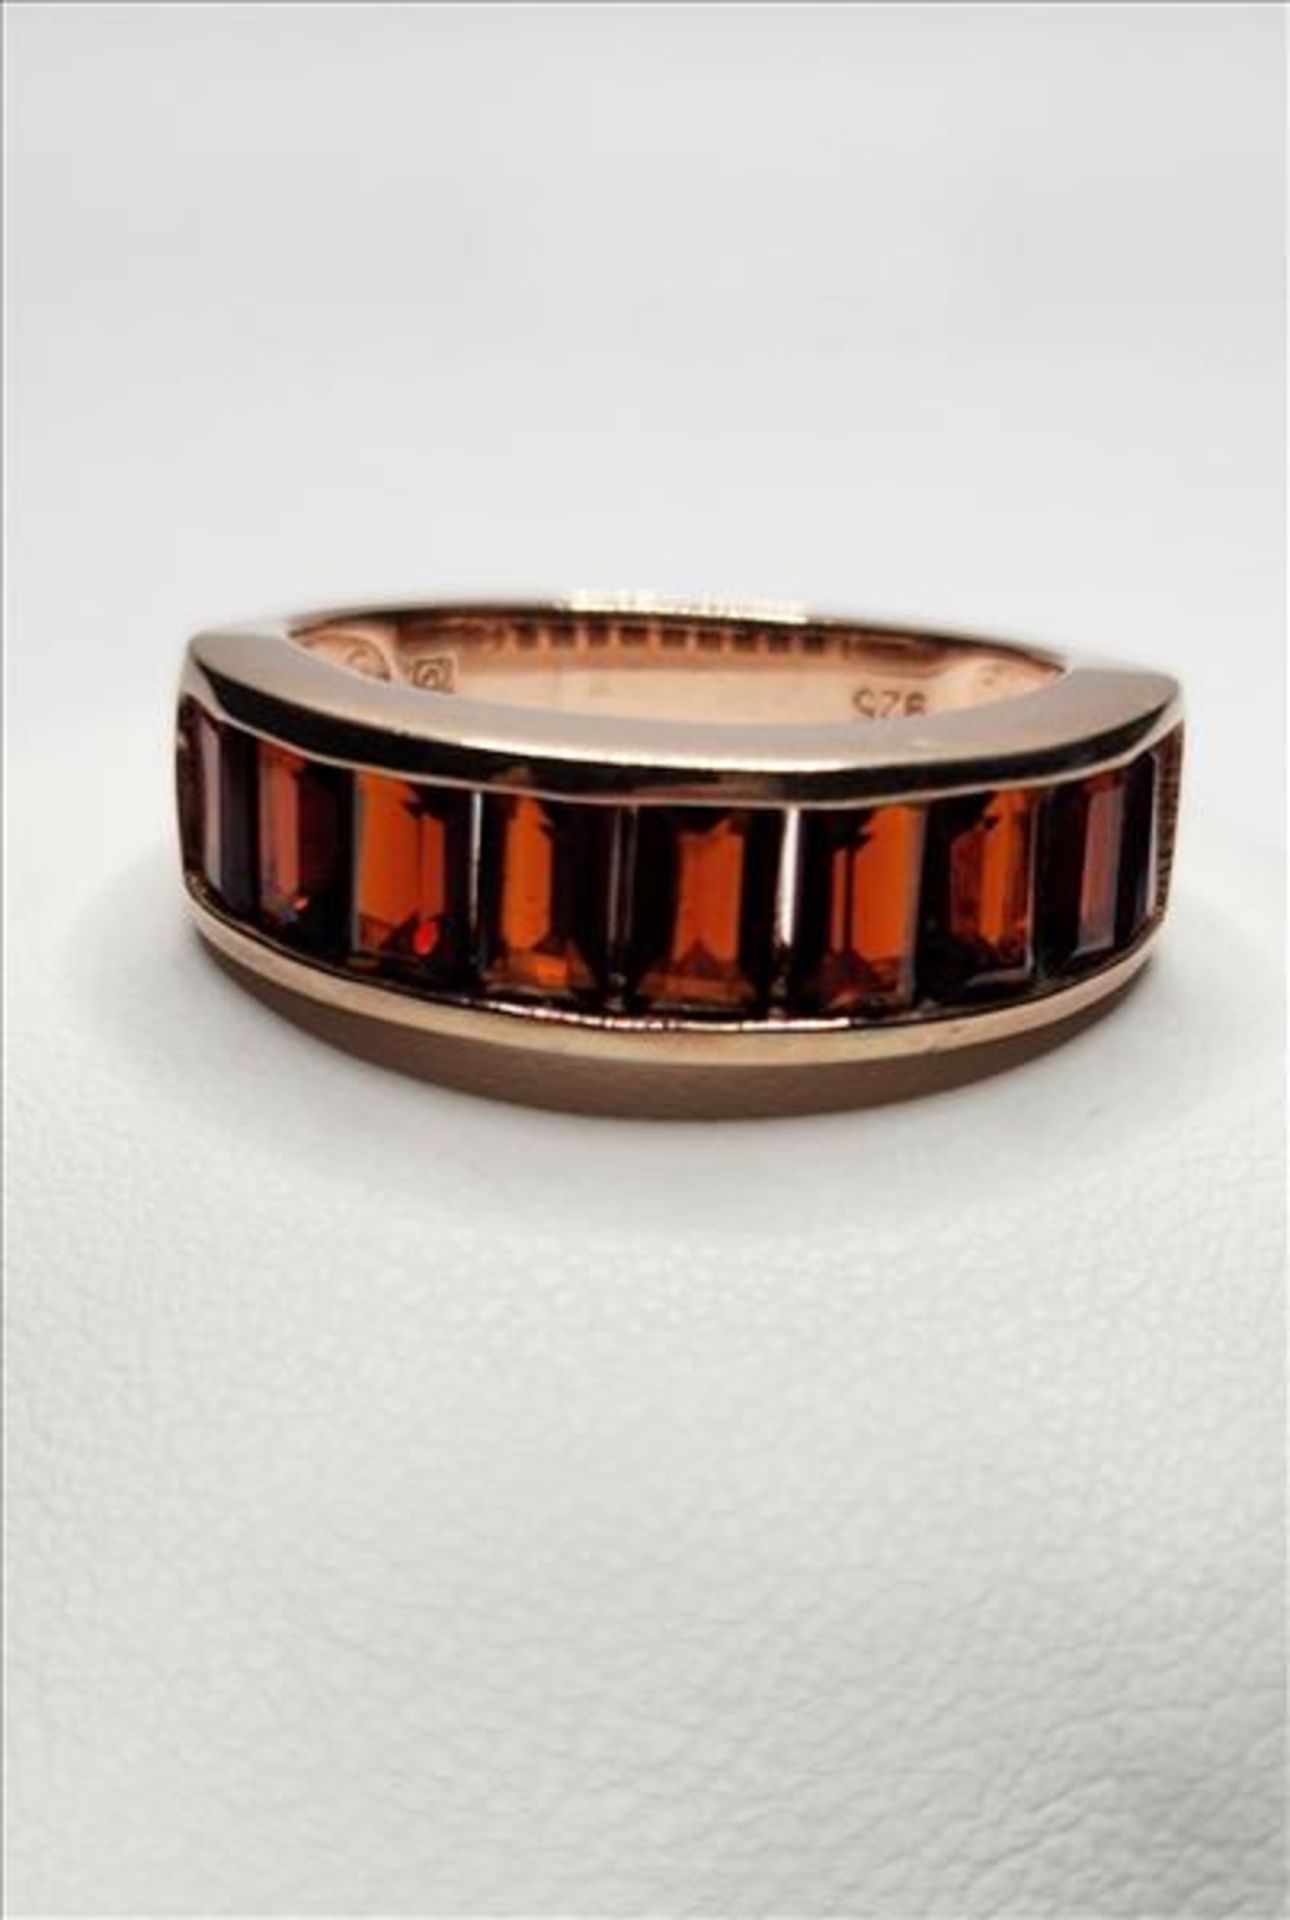 channel set amber stones sterling silver ring - Image 5 of 6